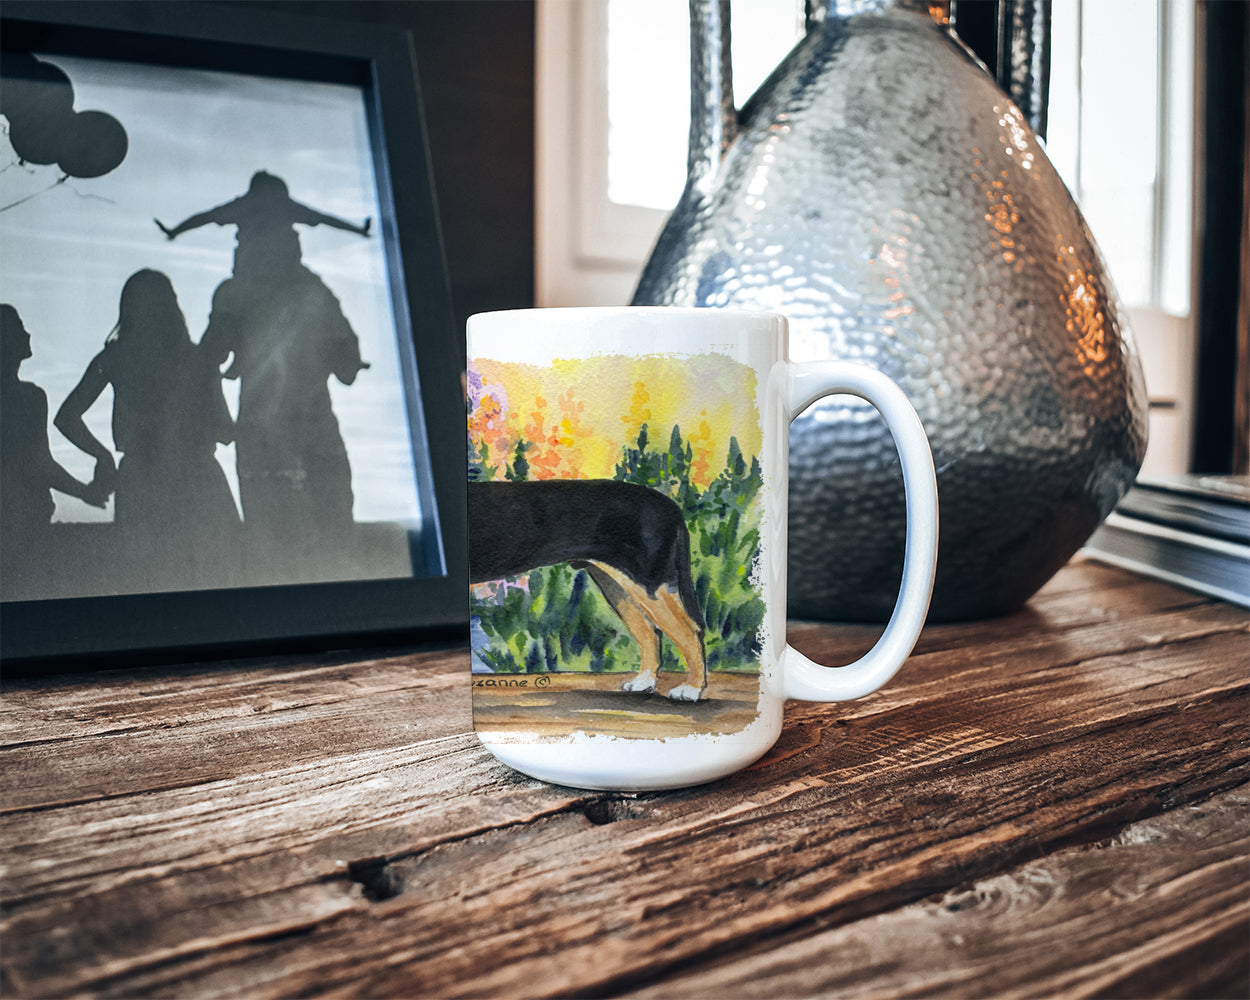 Greater Swiss Mountain Dog Dishwasher Safe Microwavable Ceramic Coffee Mug 15 ounce SS8160CM15  the-store.com.